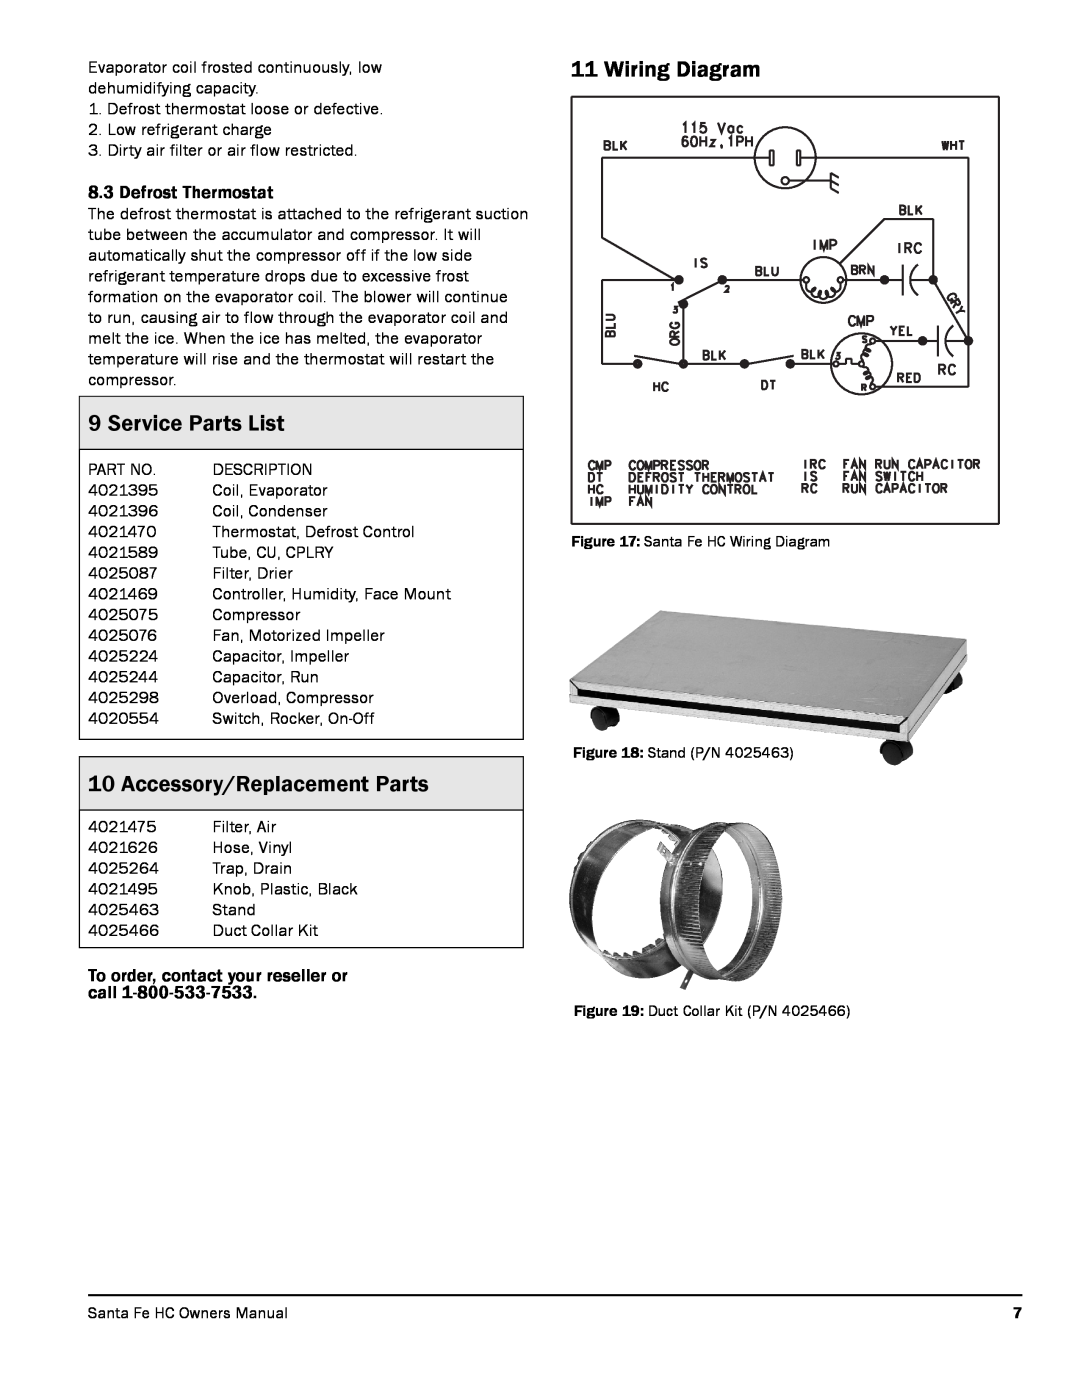 Therma-Stor Products Group 4025273 Service Parts List, Accessory/Replacement Parts, Wiring Diagram, Defrost Thermostat 